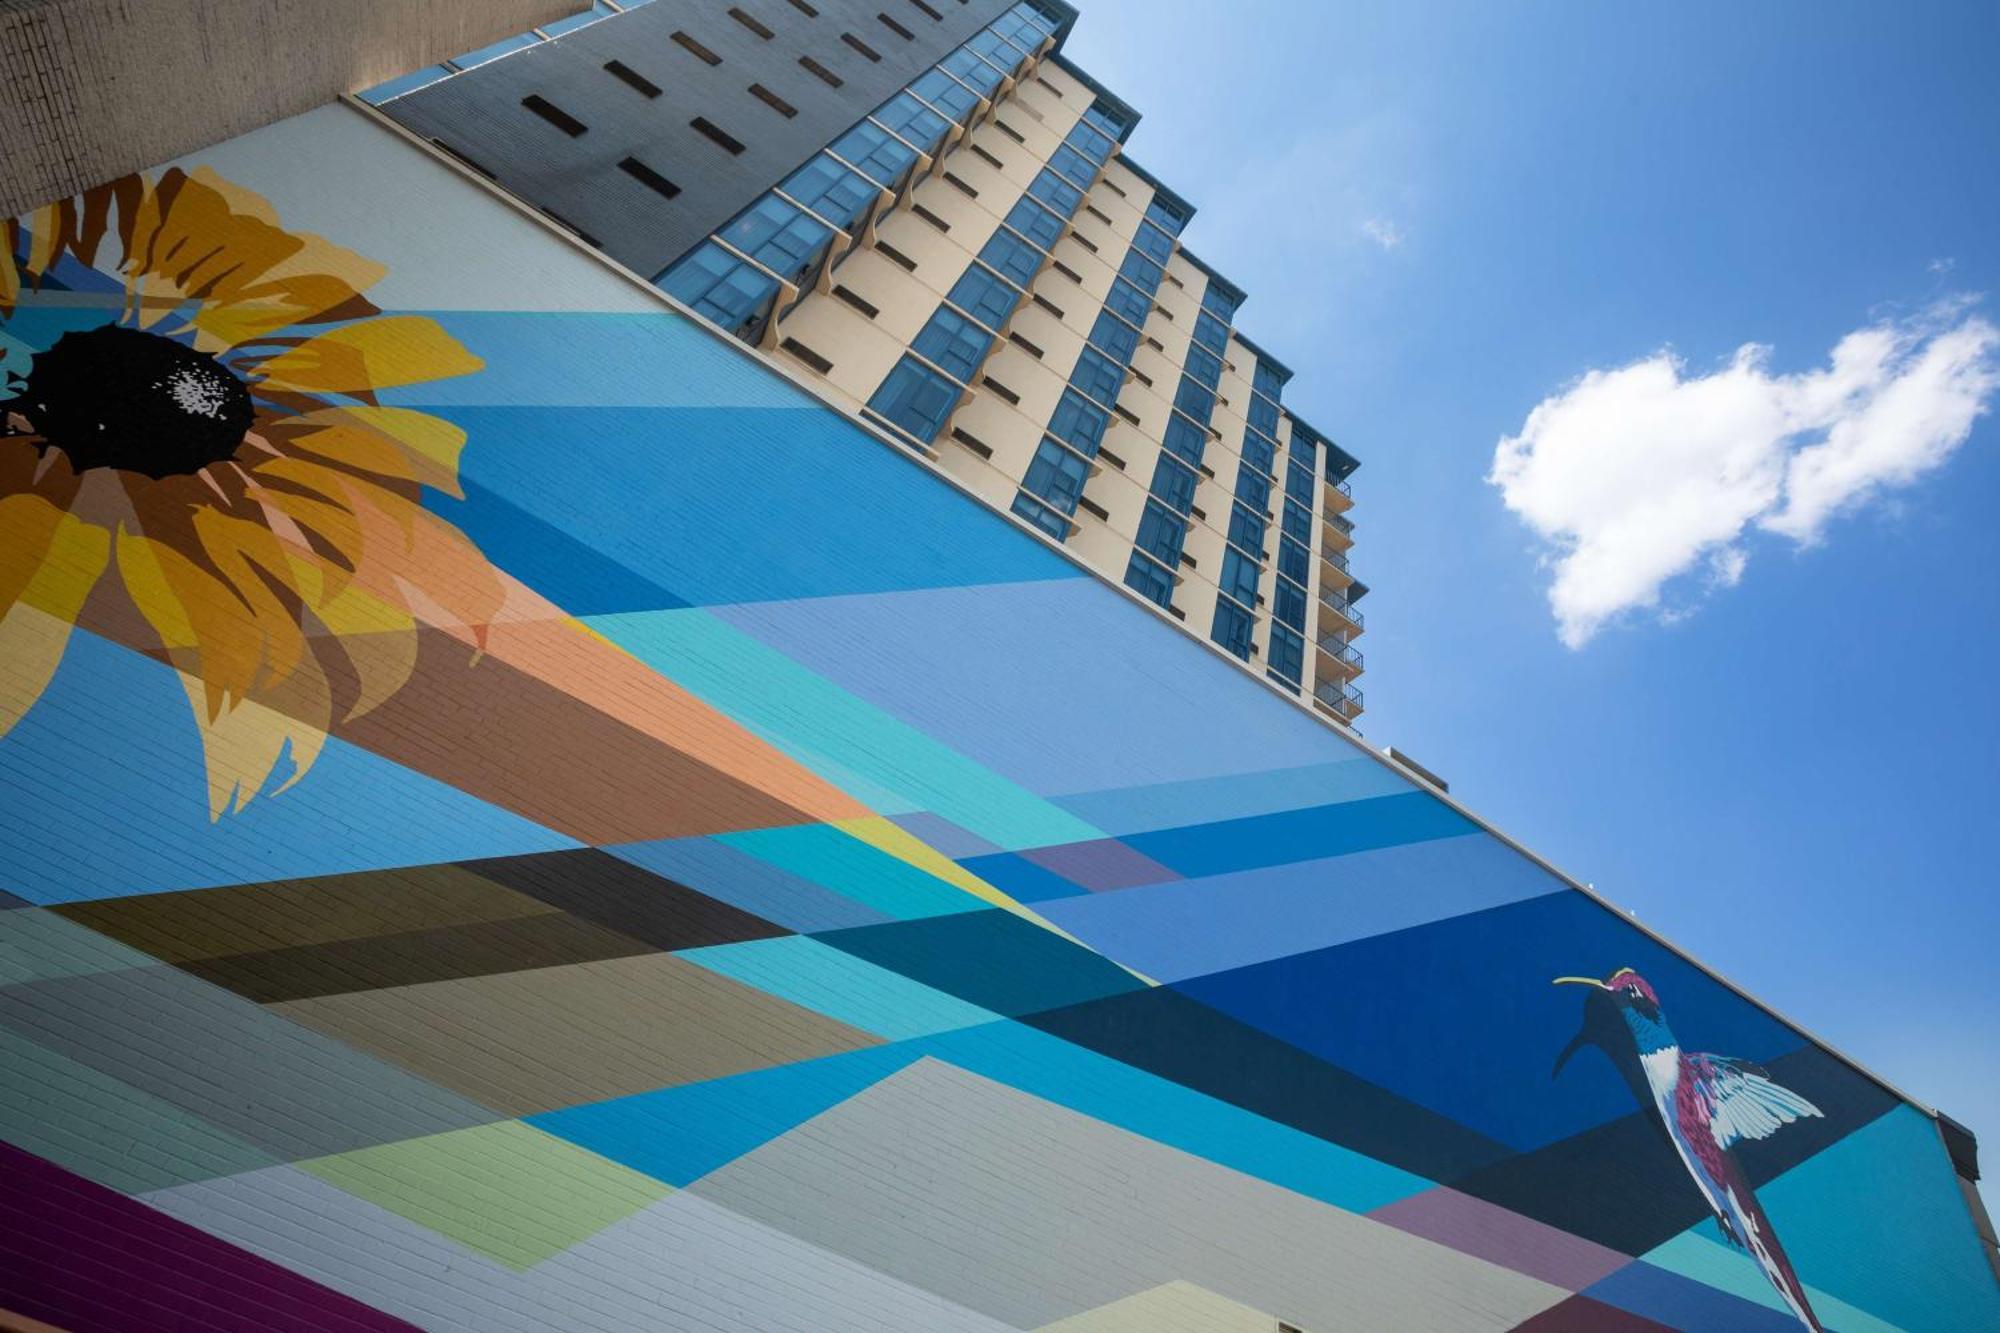 The Bethesdan Hotel, Tapestry Collection By Hilton Exterior foto